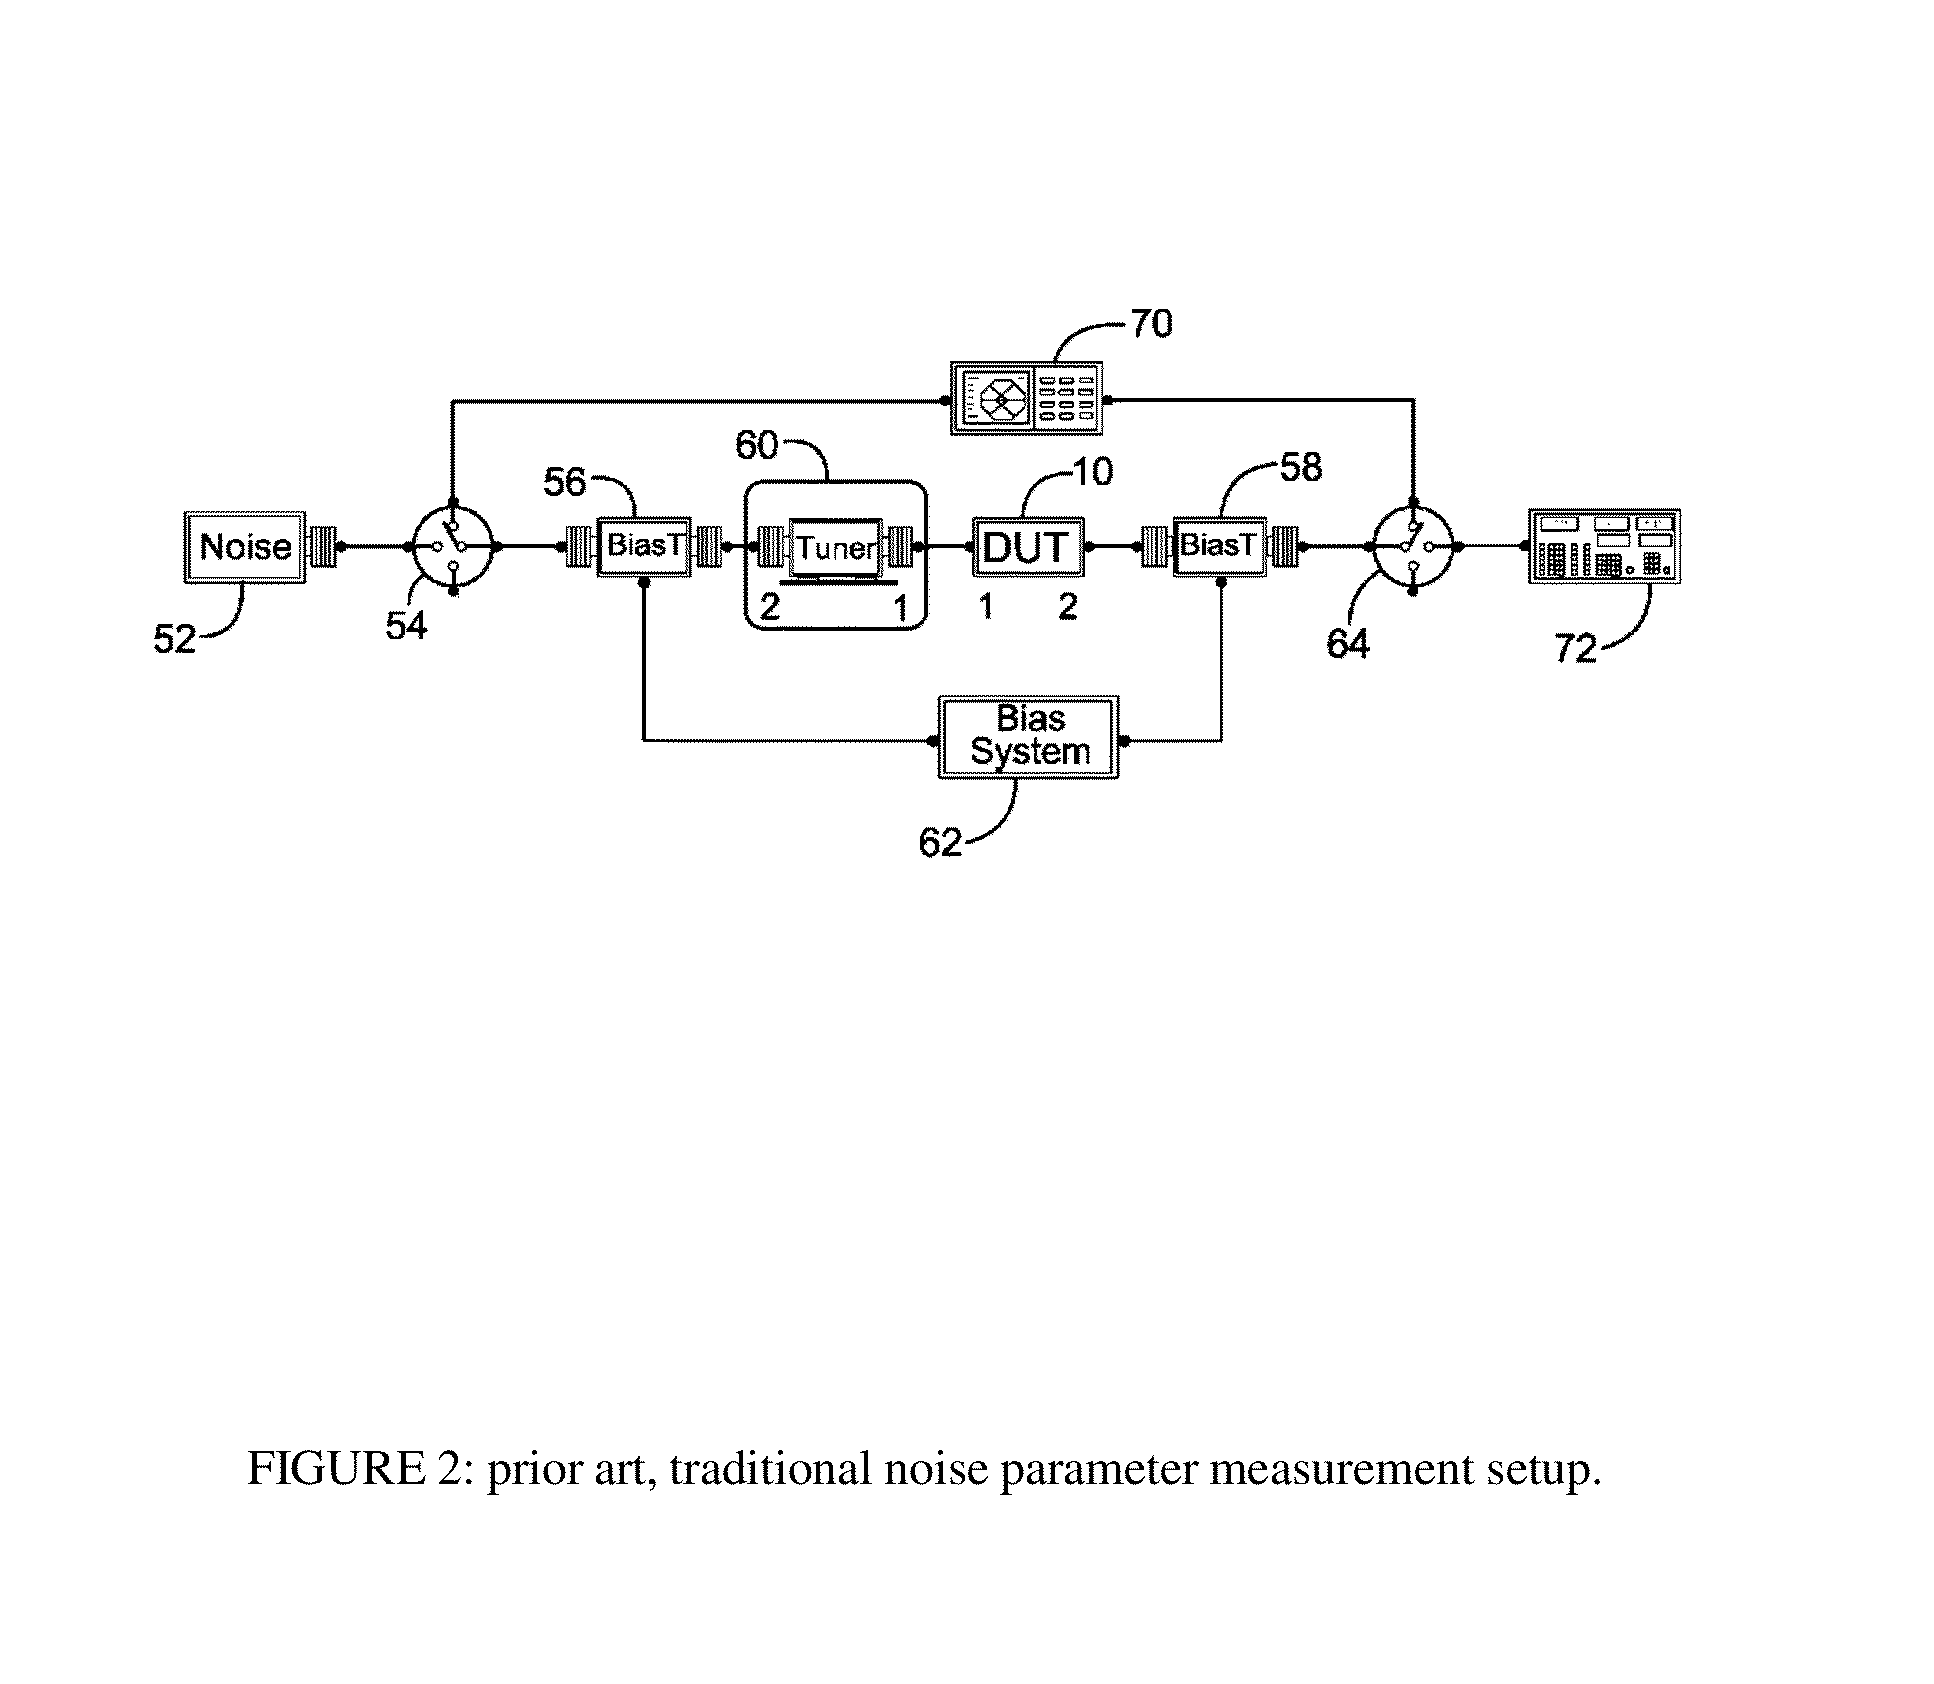 Noise parameter measurement system and method